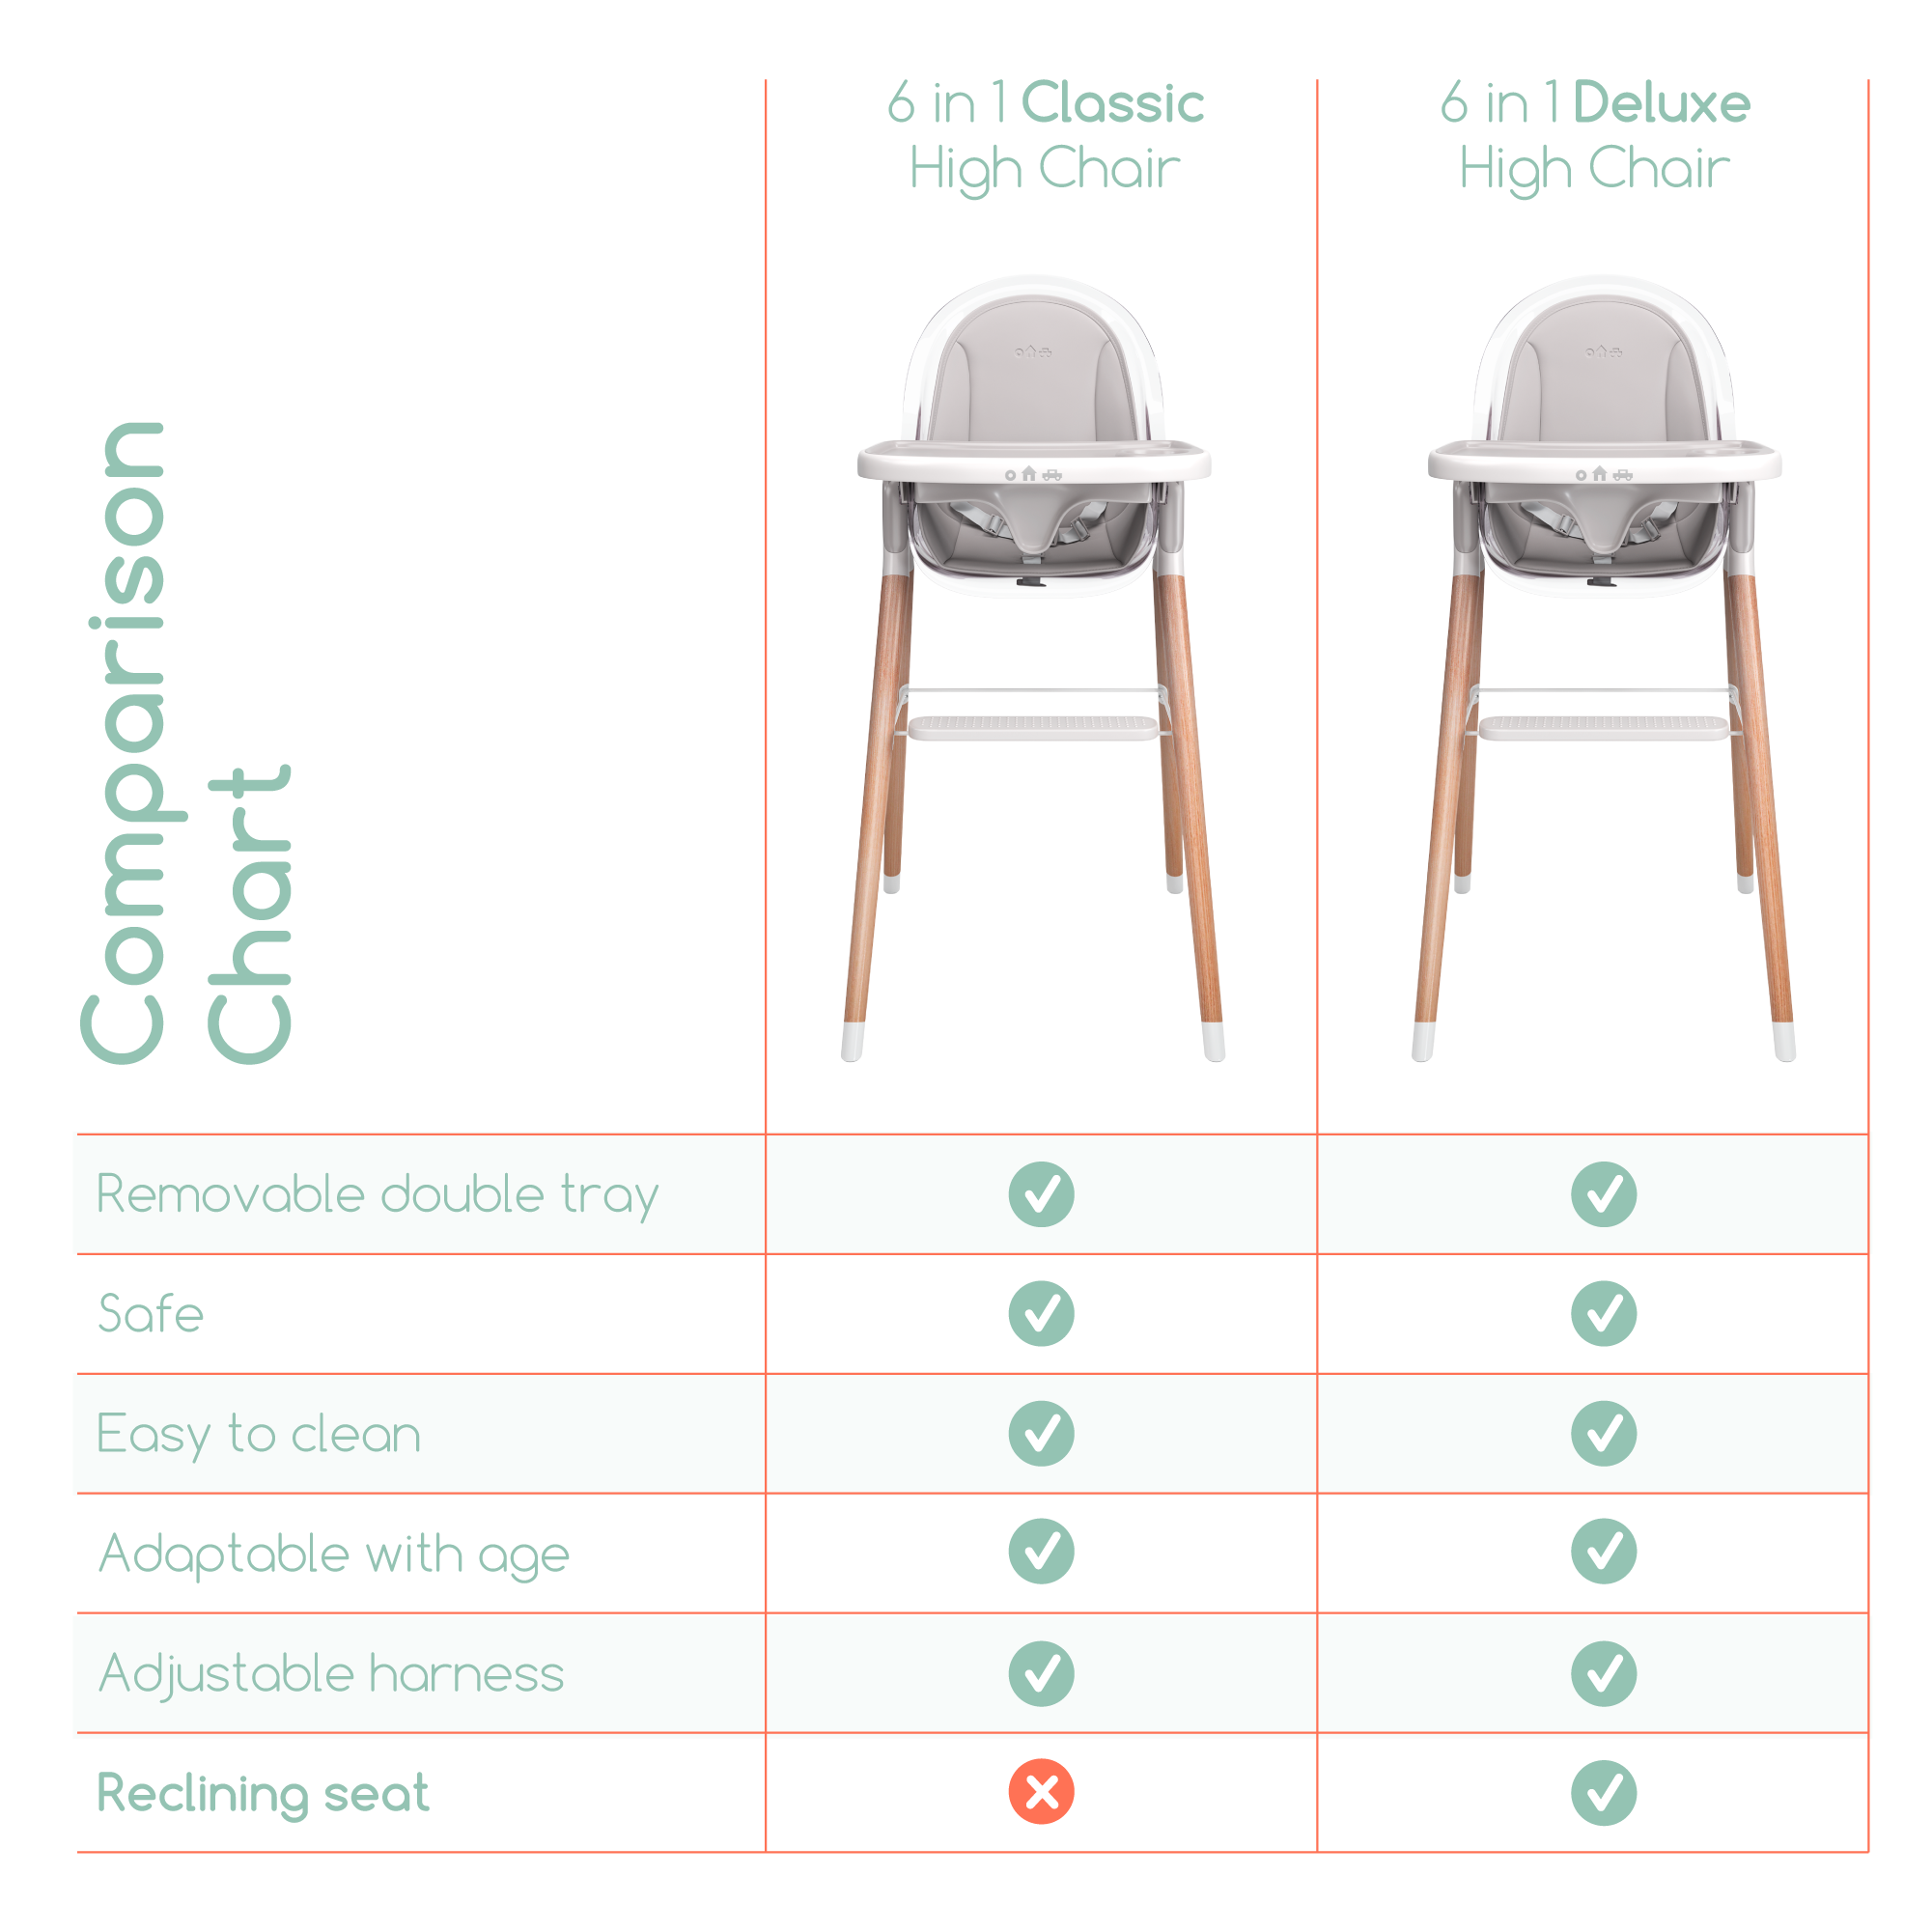 Children of Design 6-in-1 Deluxe High Chair with Cushion and Step